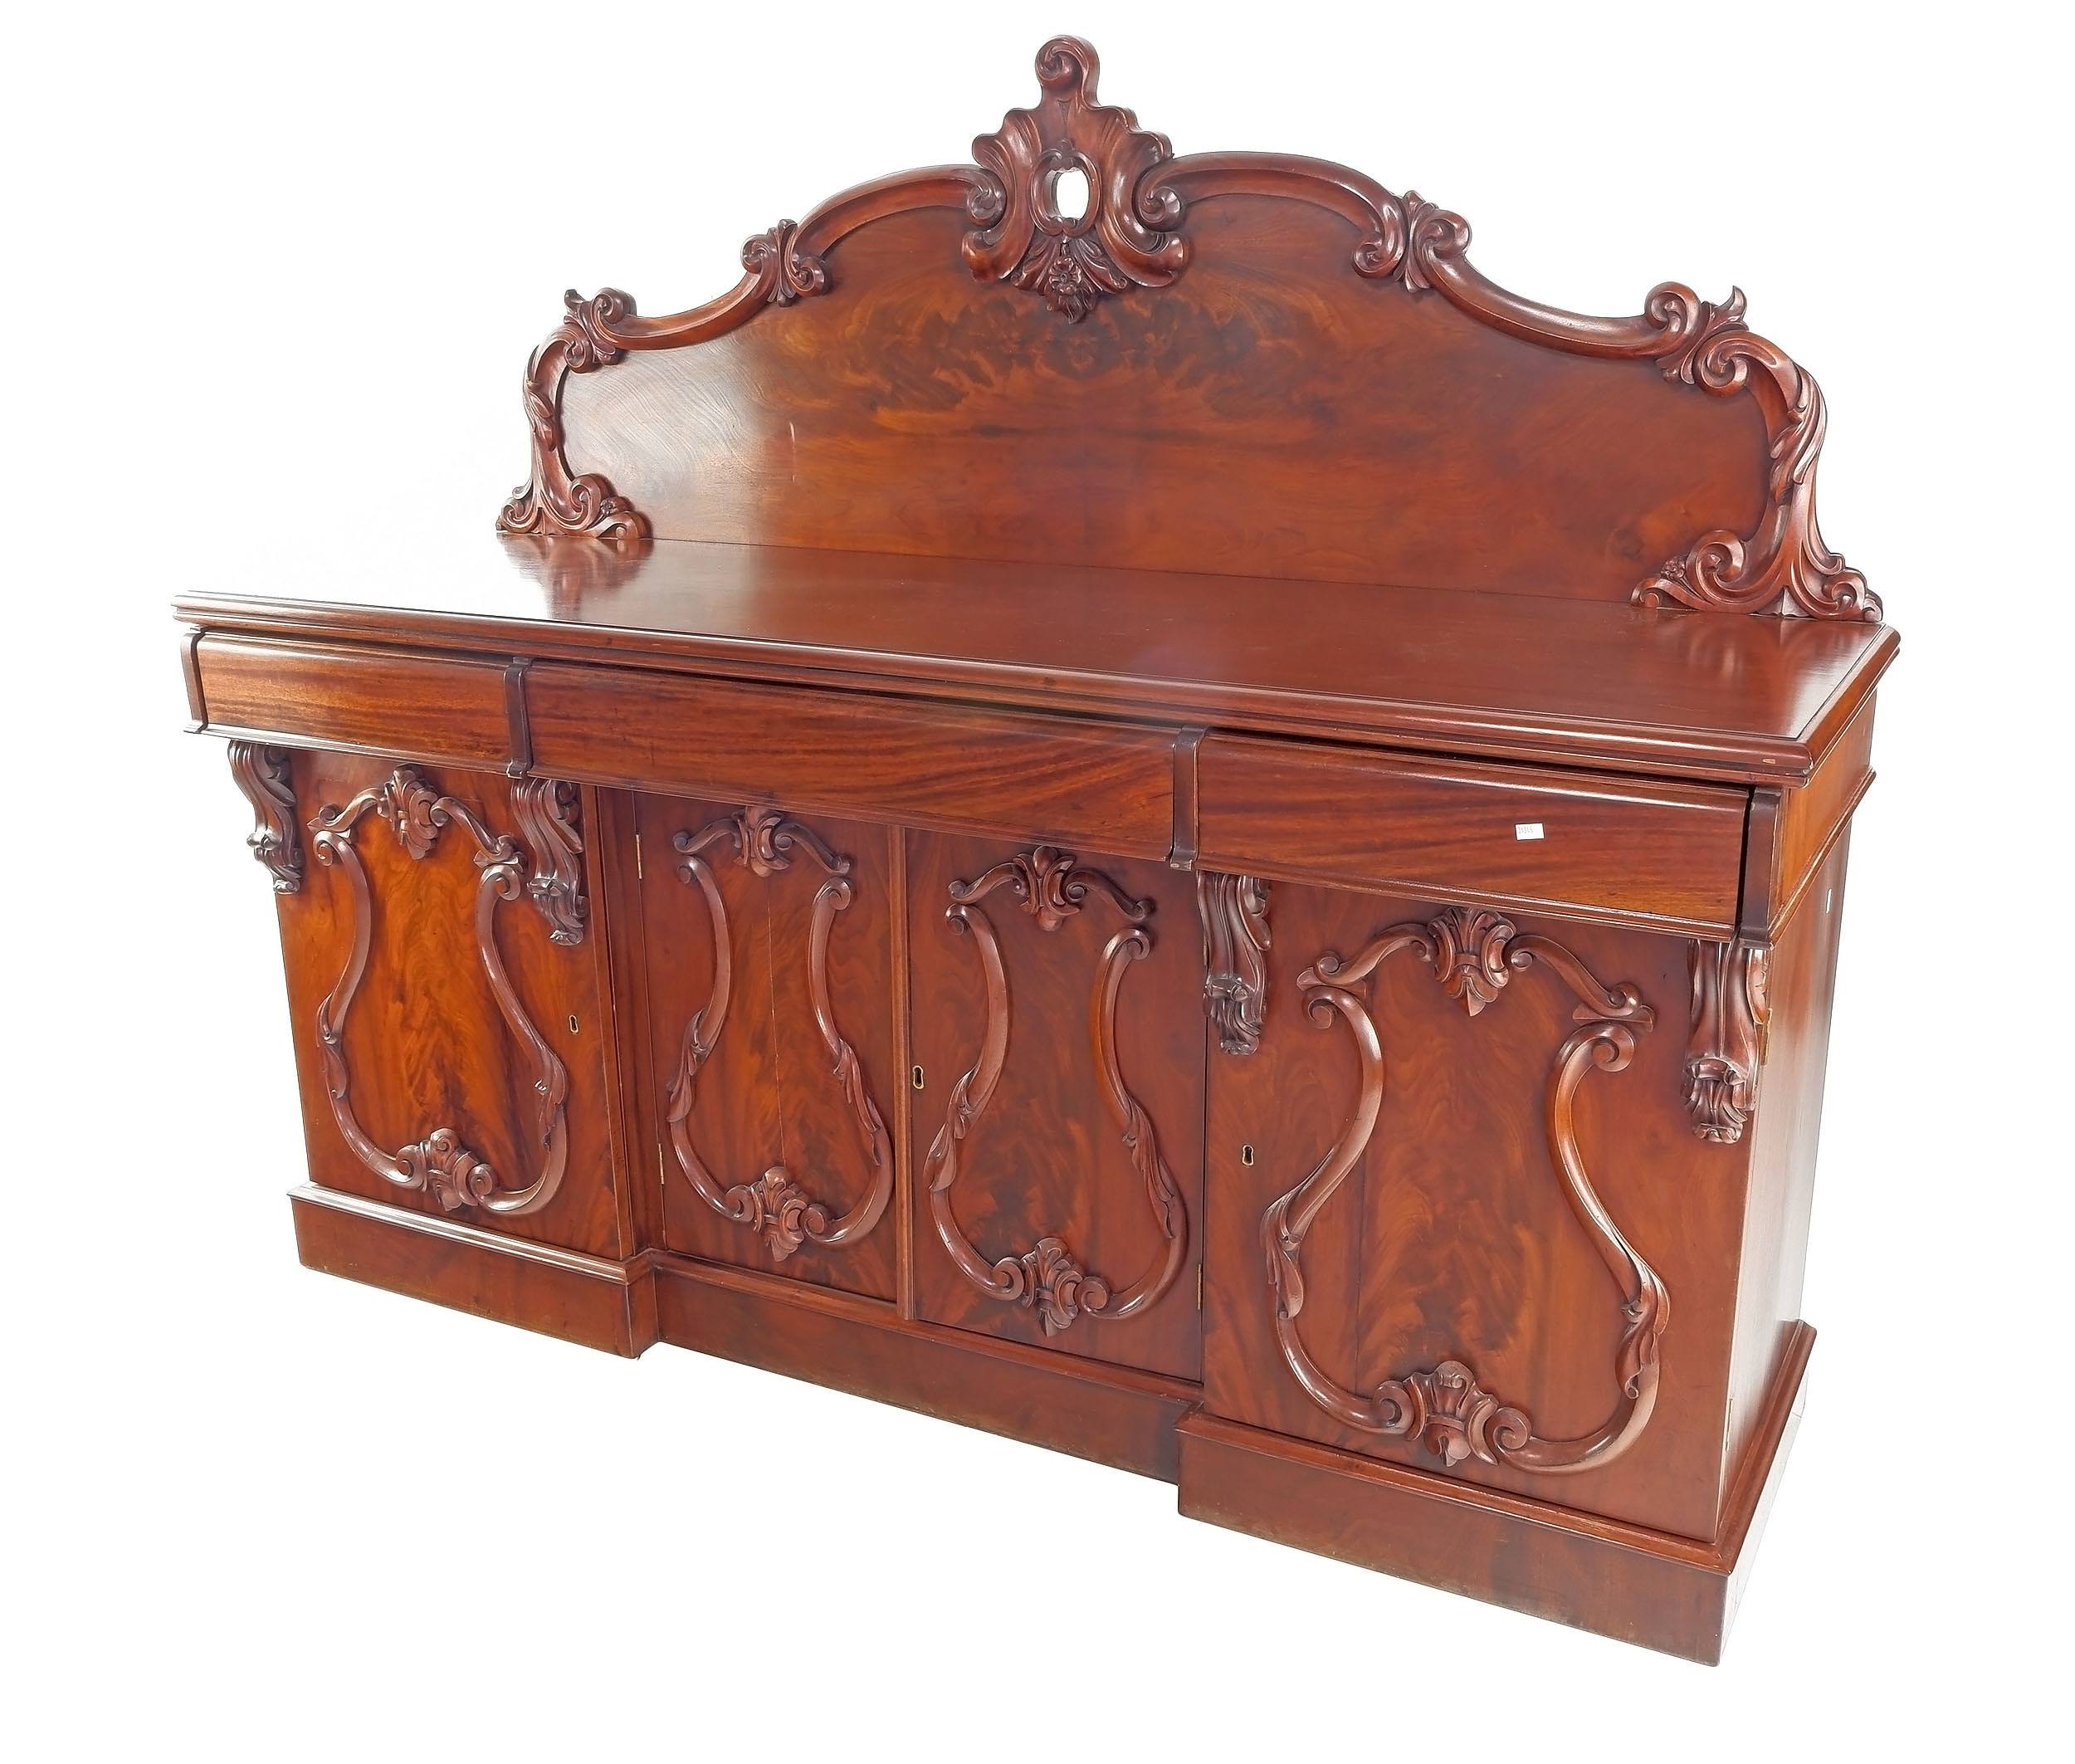 'Victorian Flame Mahogany Breakfront Sideboard with Carved Corbels and Shield Doors, Circa 1880'